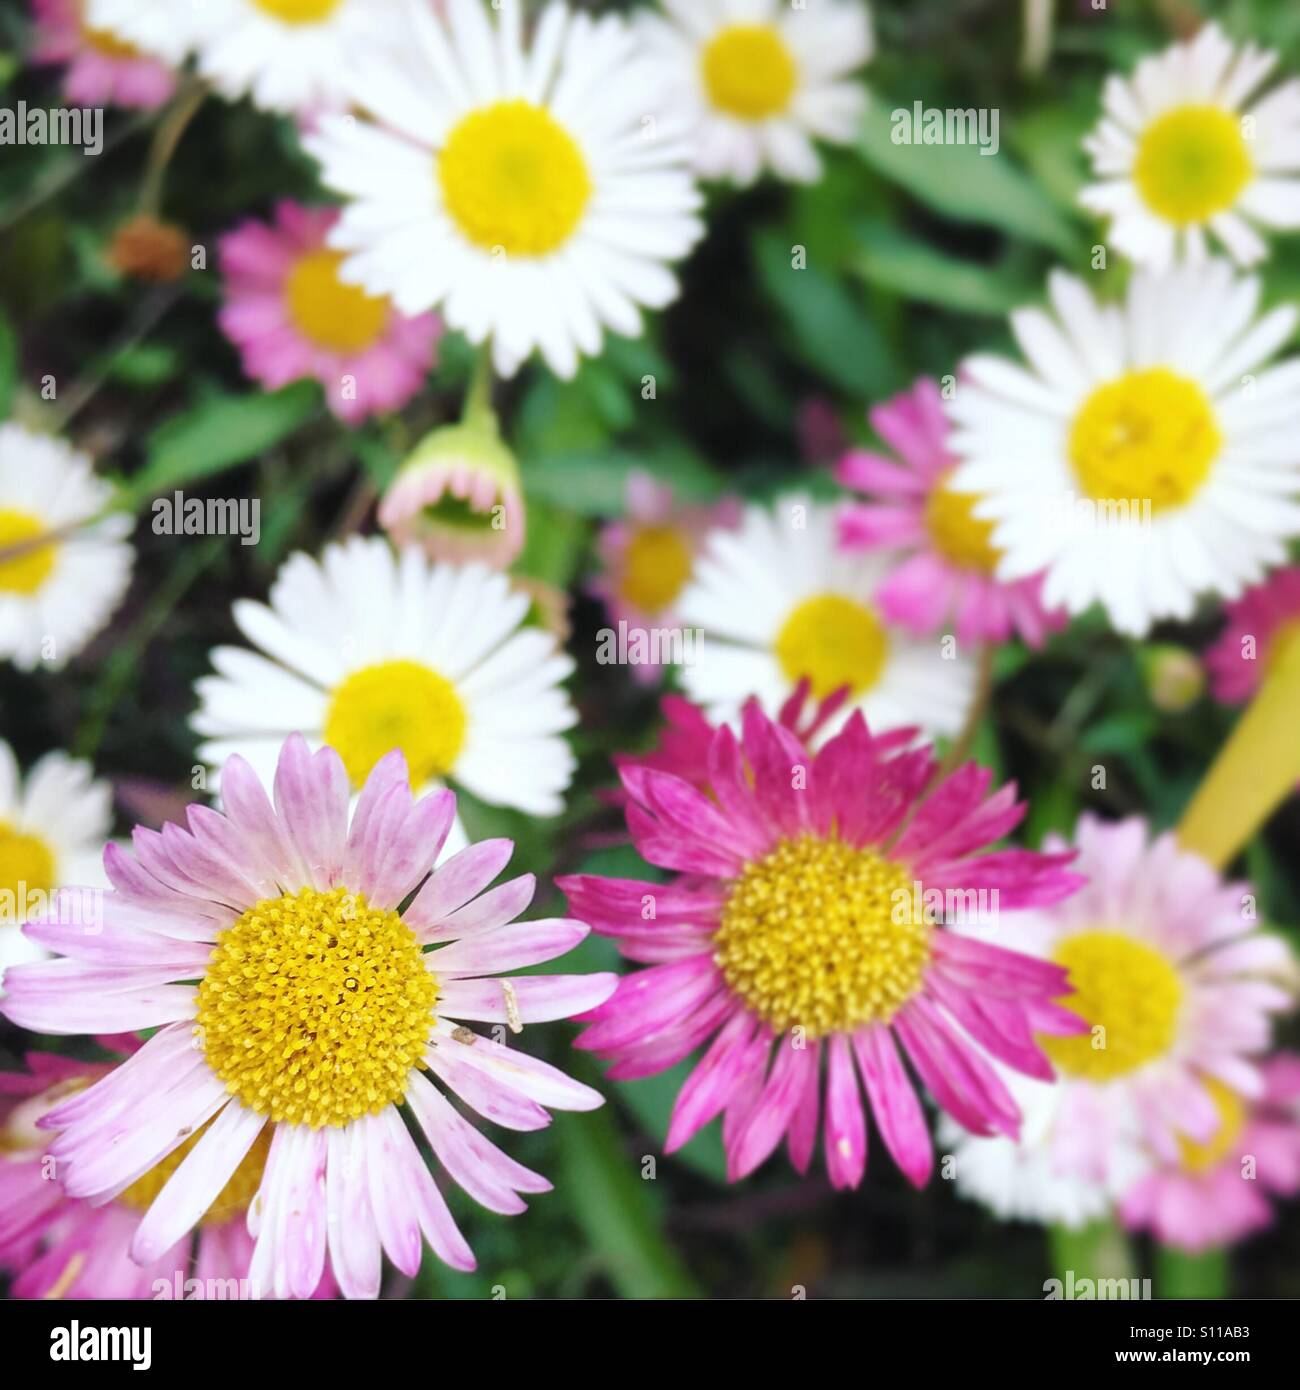 Pink and white daisies Stock Photo